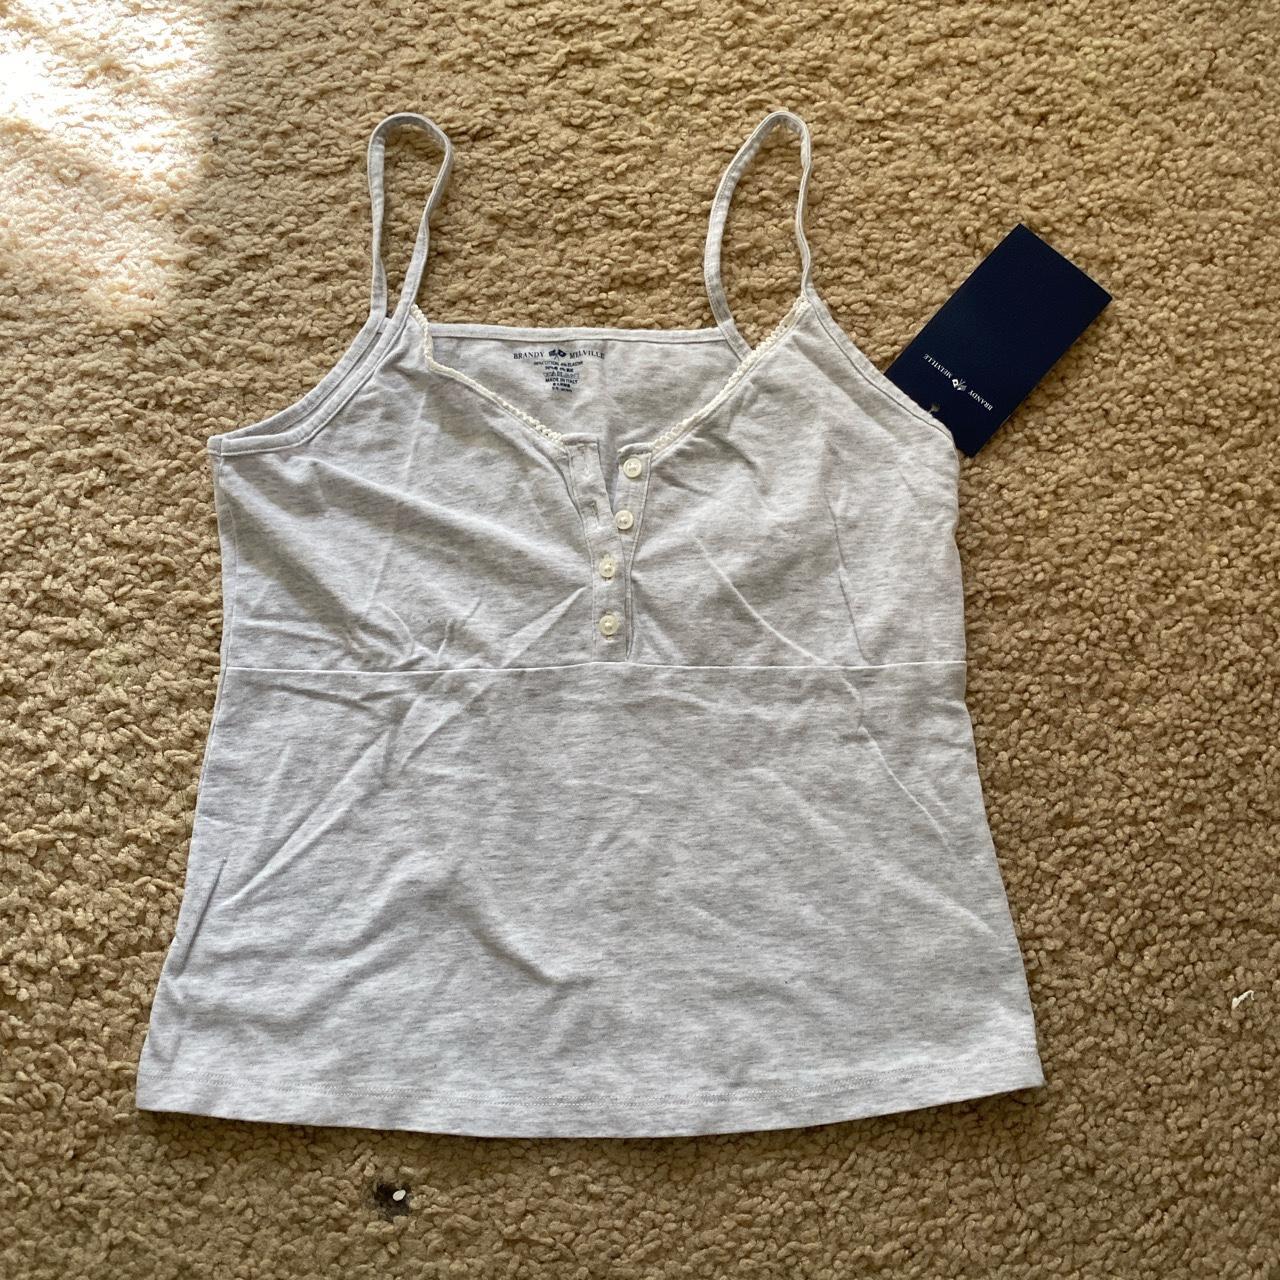 Brandy Melville Dalis Tank Top Gray - $15 New With Tags - From Seven